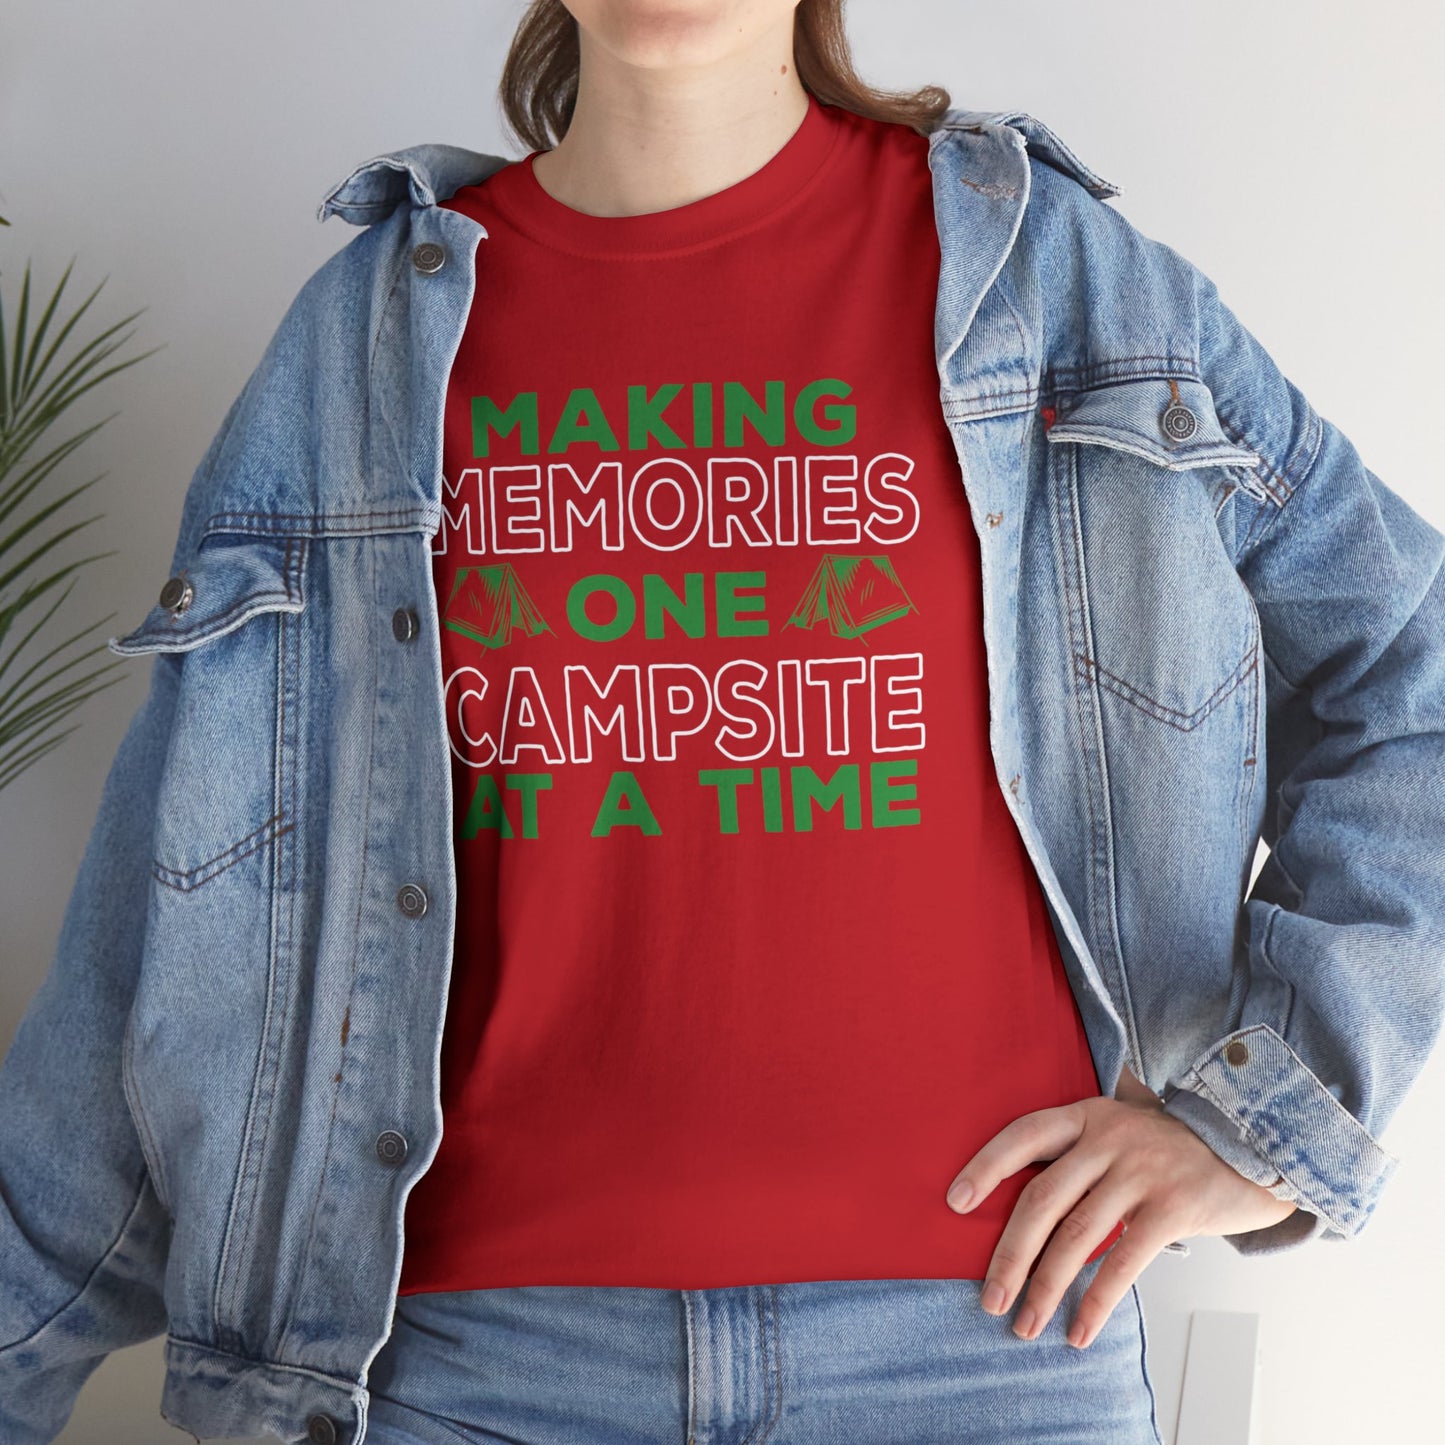 Celebrate Outdoor Adventures with Our 'Making Memories One Campsite at a Time' T-shirt